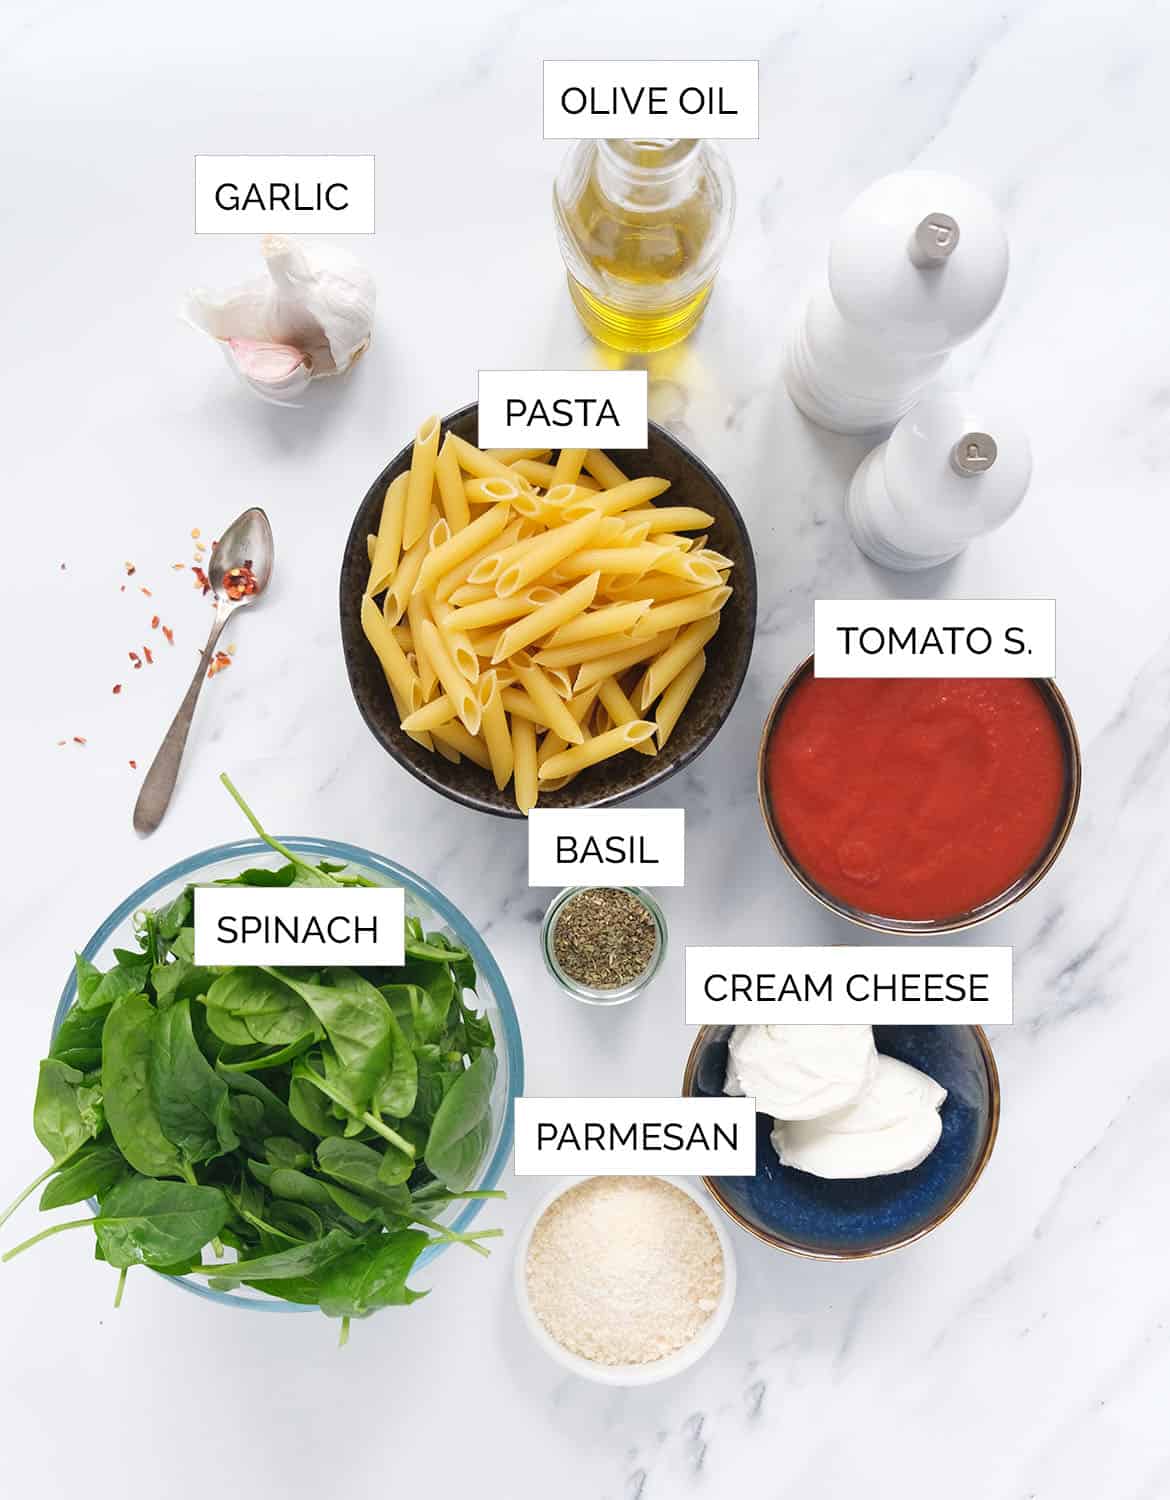 The ingredients to make this creamy tomato spinach pasta are arranged over a white background.